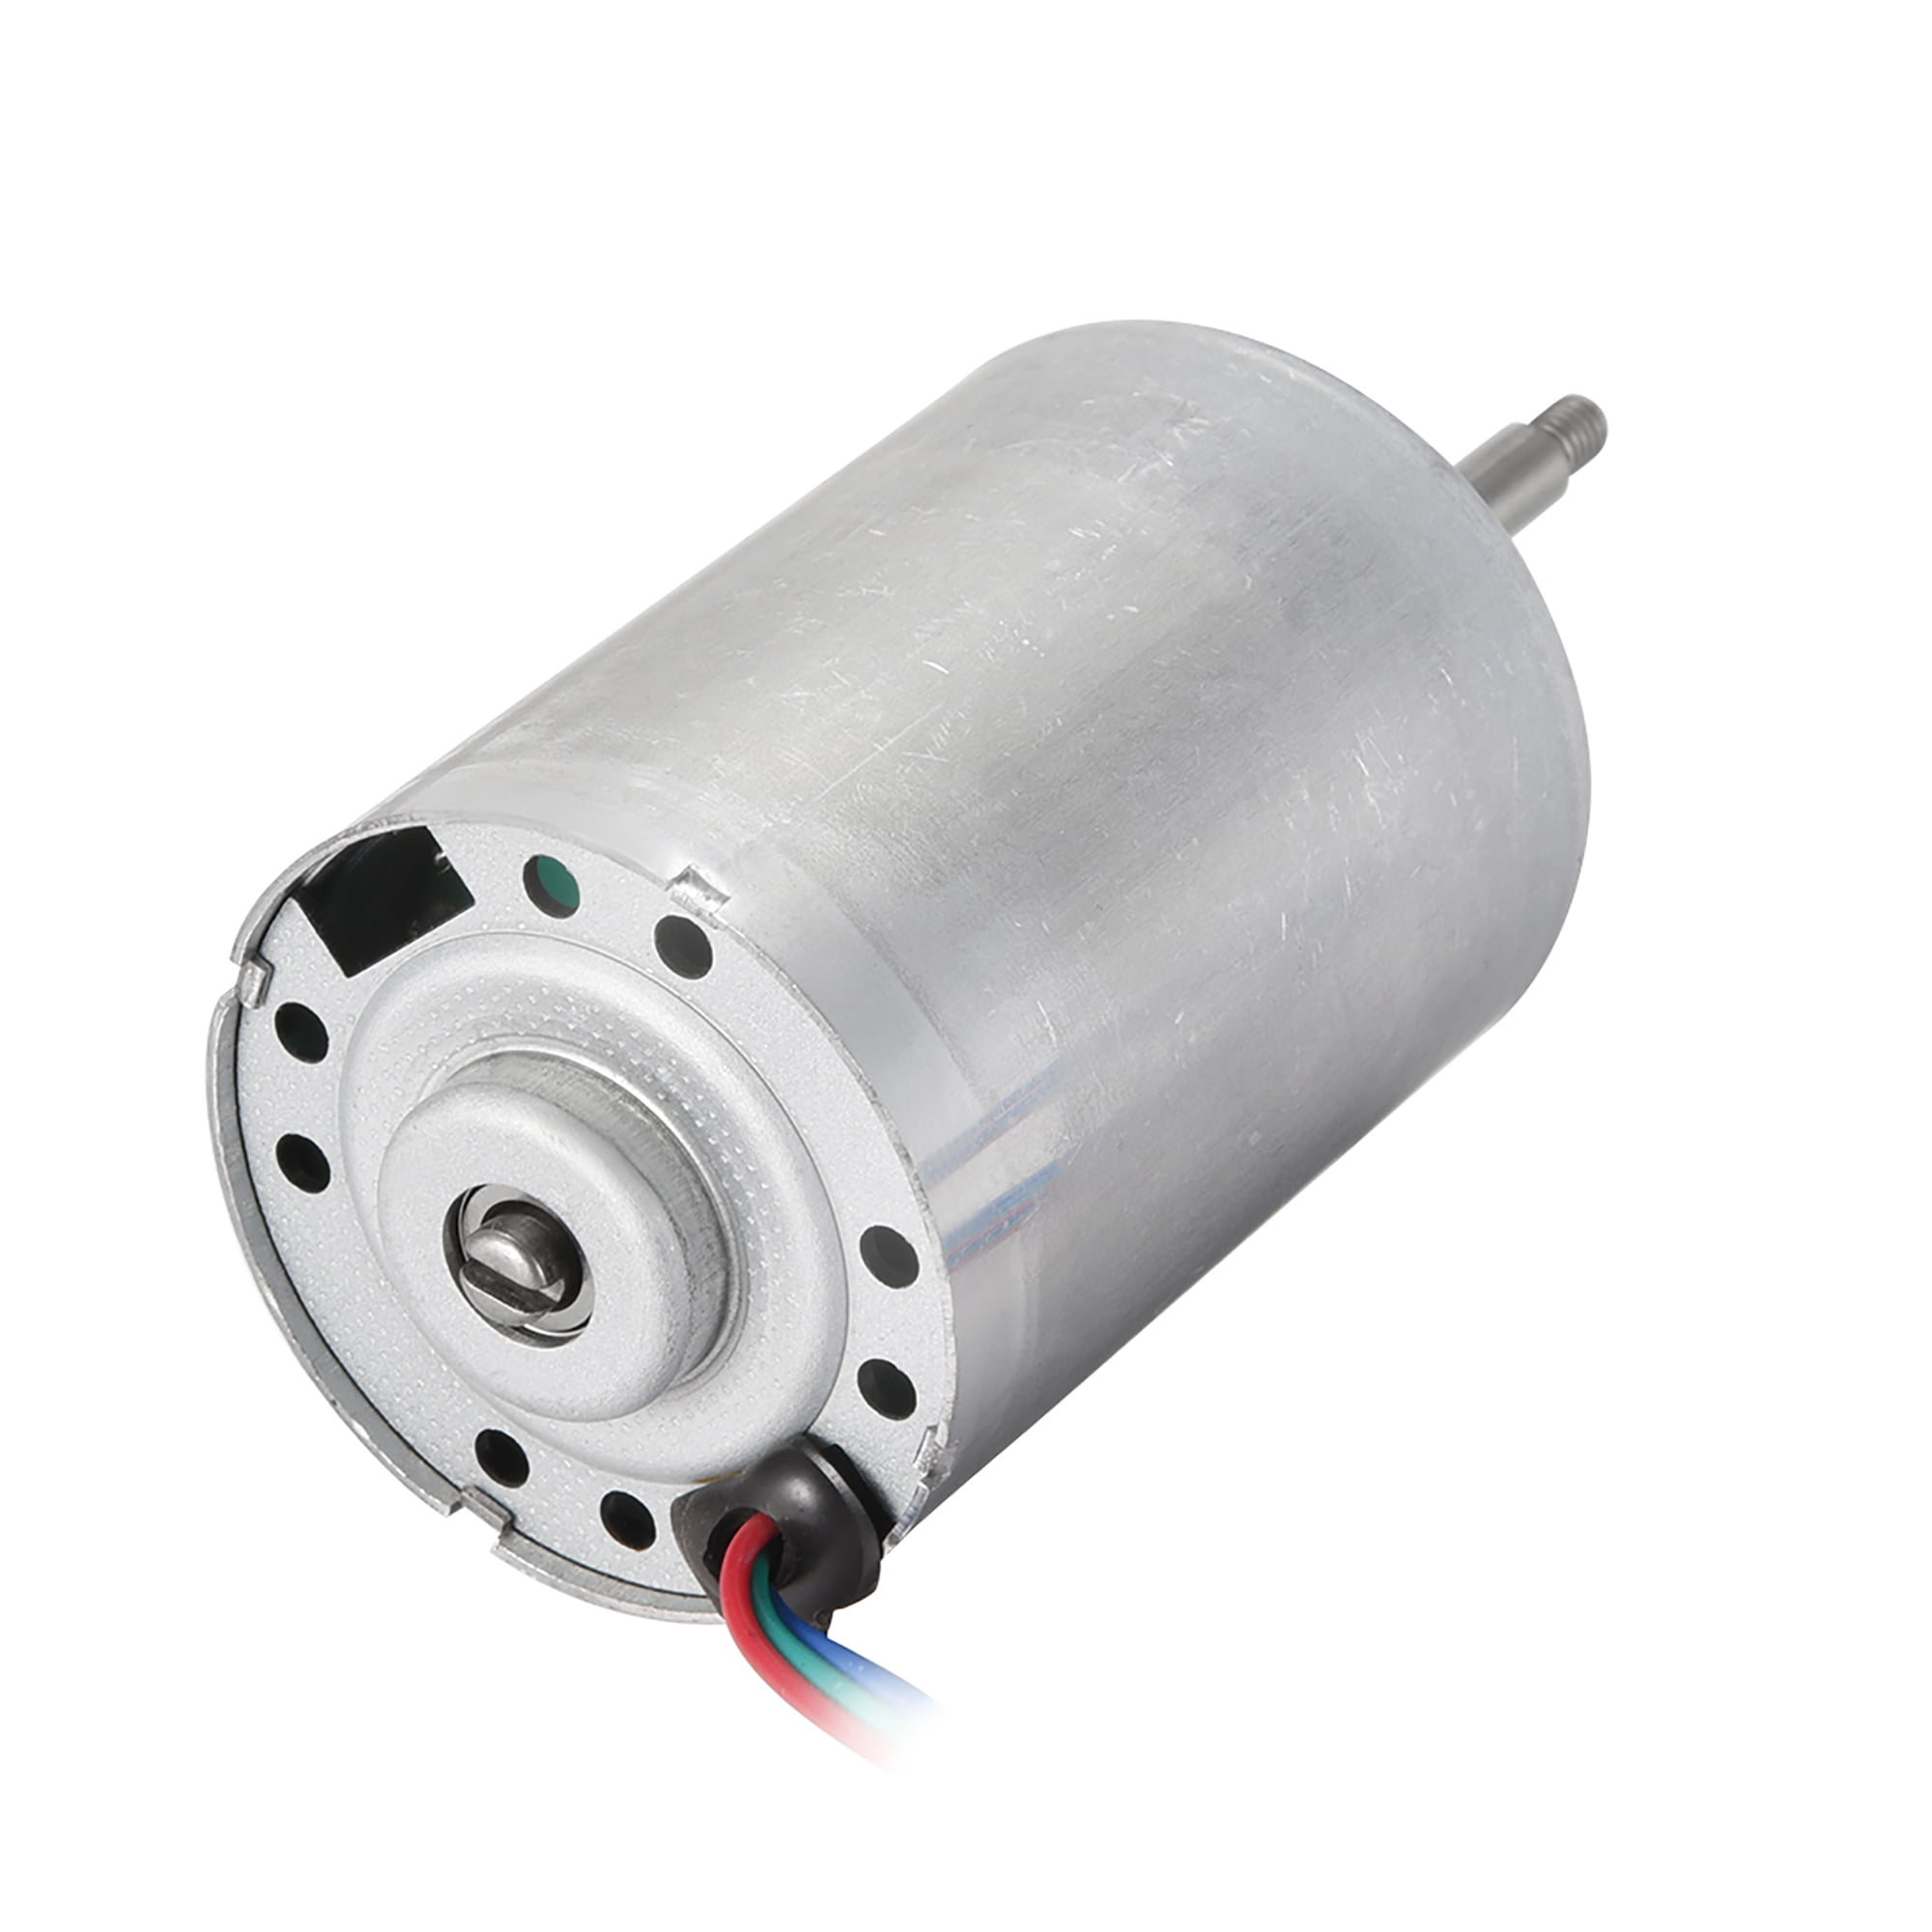 DC Brushless Motor 220V 3 Phase Dual Bearing Electric High Speed Motor 3 Wire 